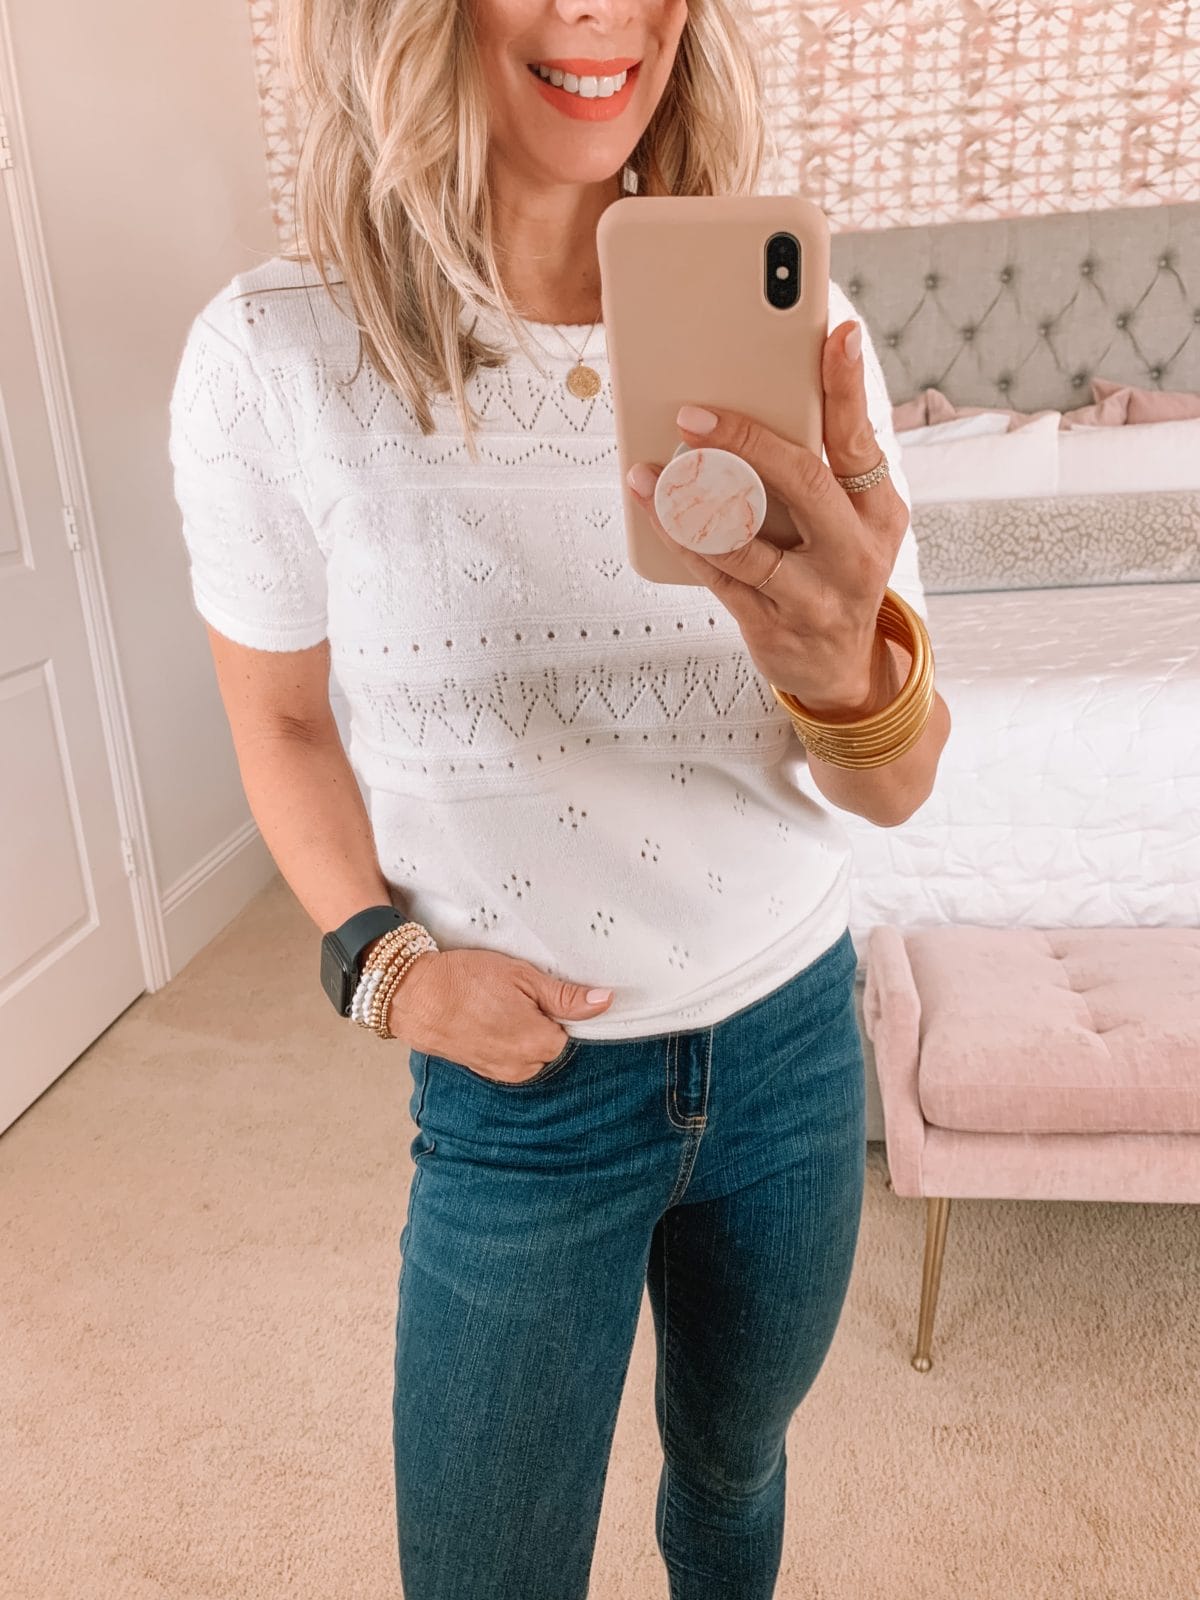 Amazon Fashion Faves, White Embroidered Top, Jeans, Wedge Sandals